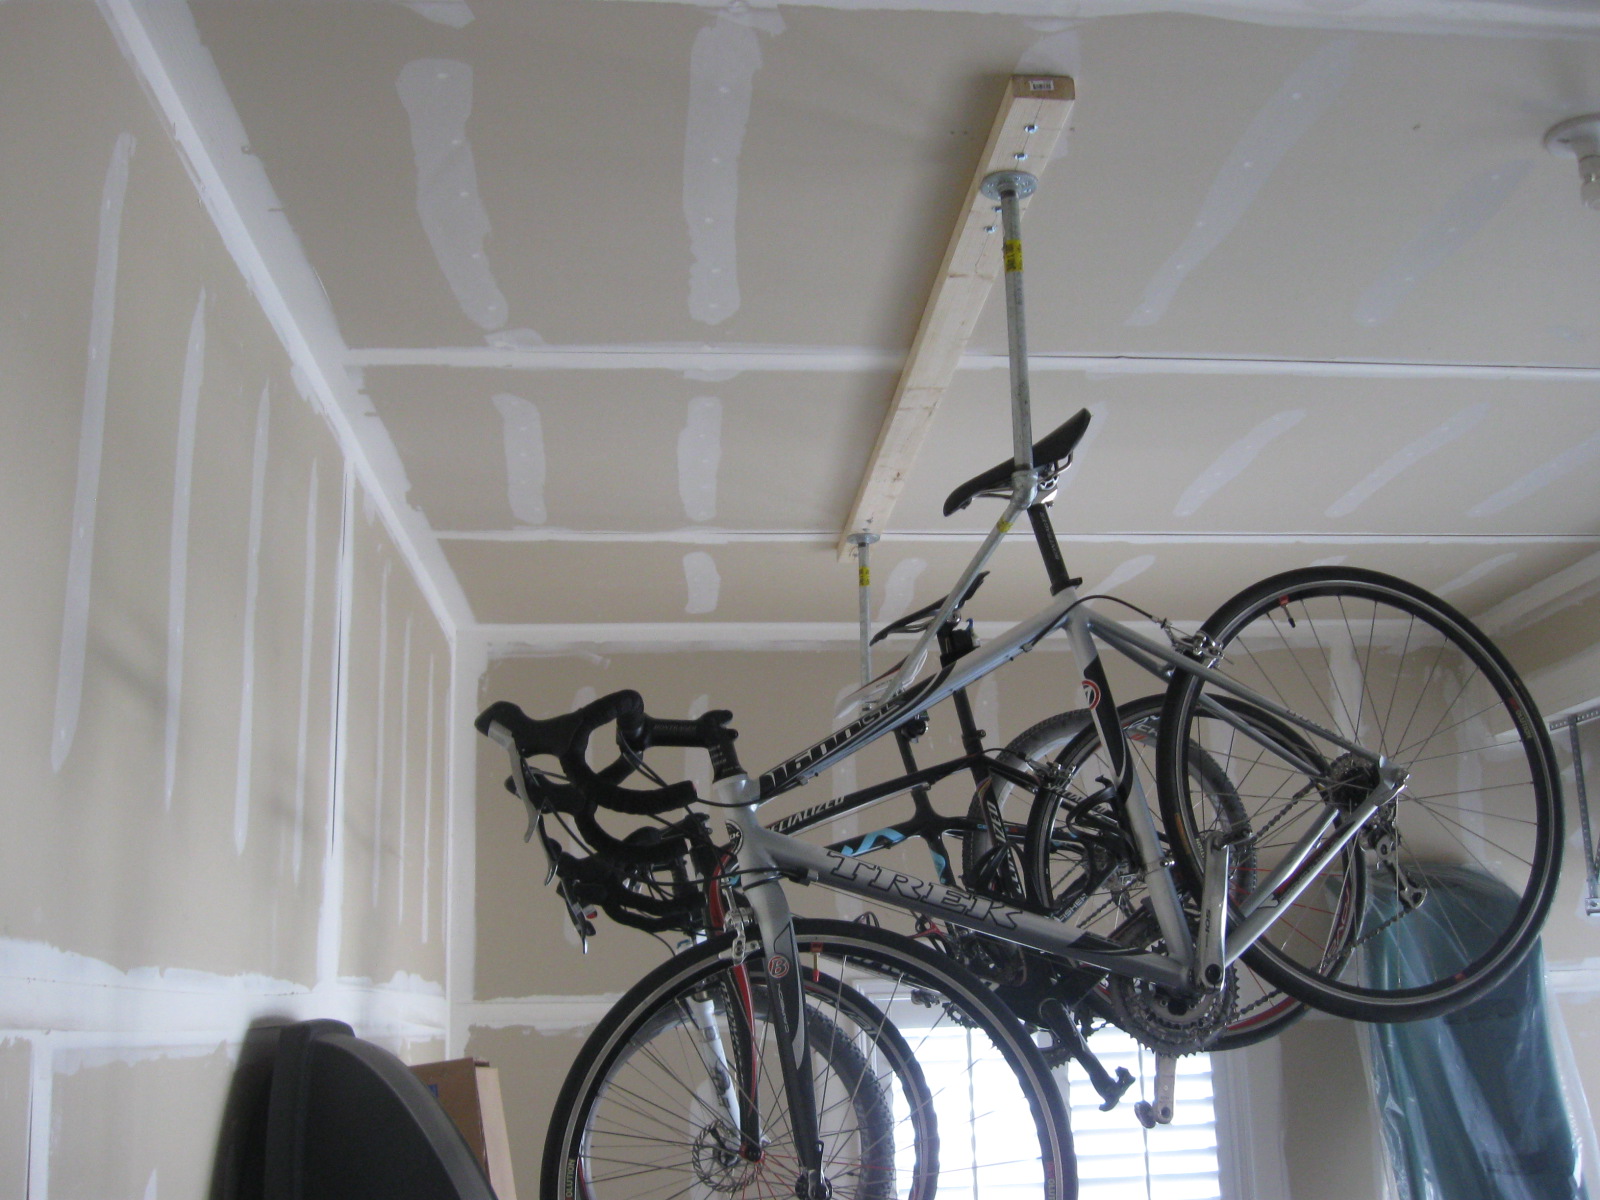 So little time, so much to explore: Garage Ceiling Bike Rack